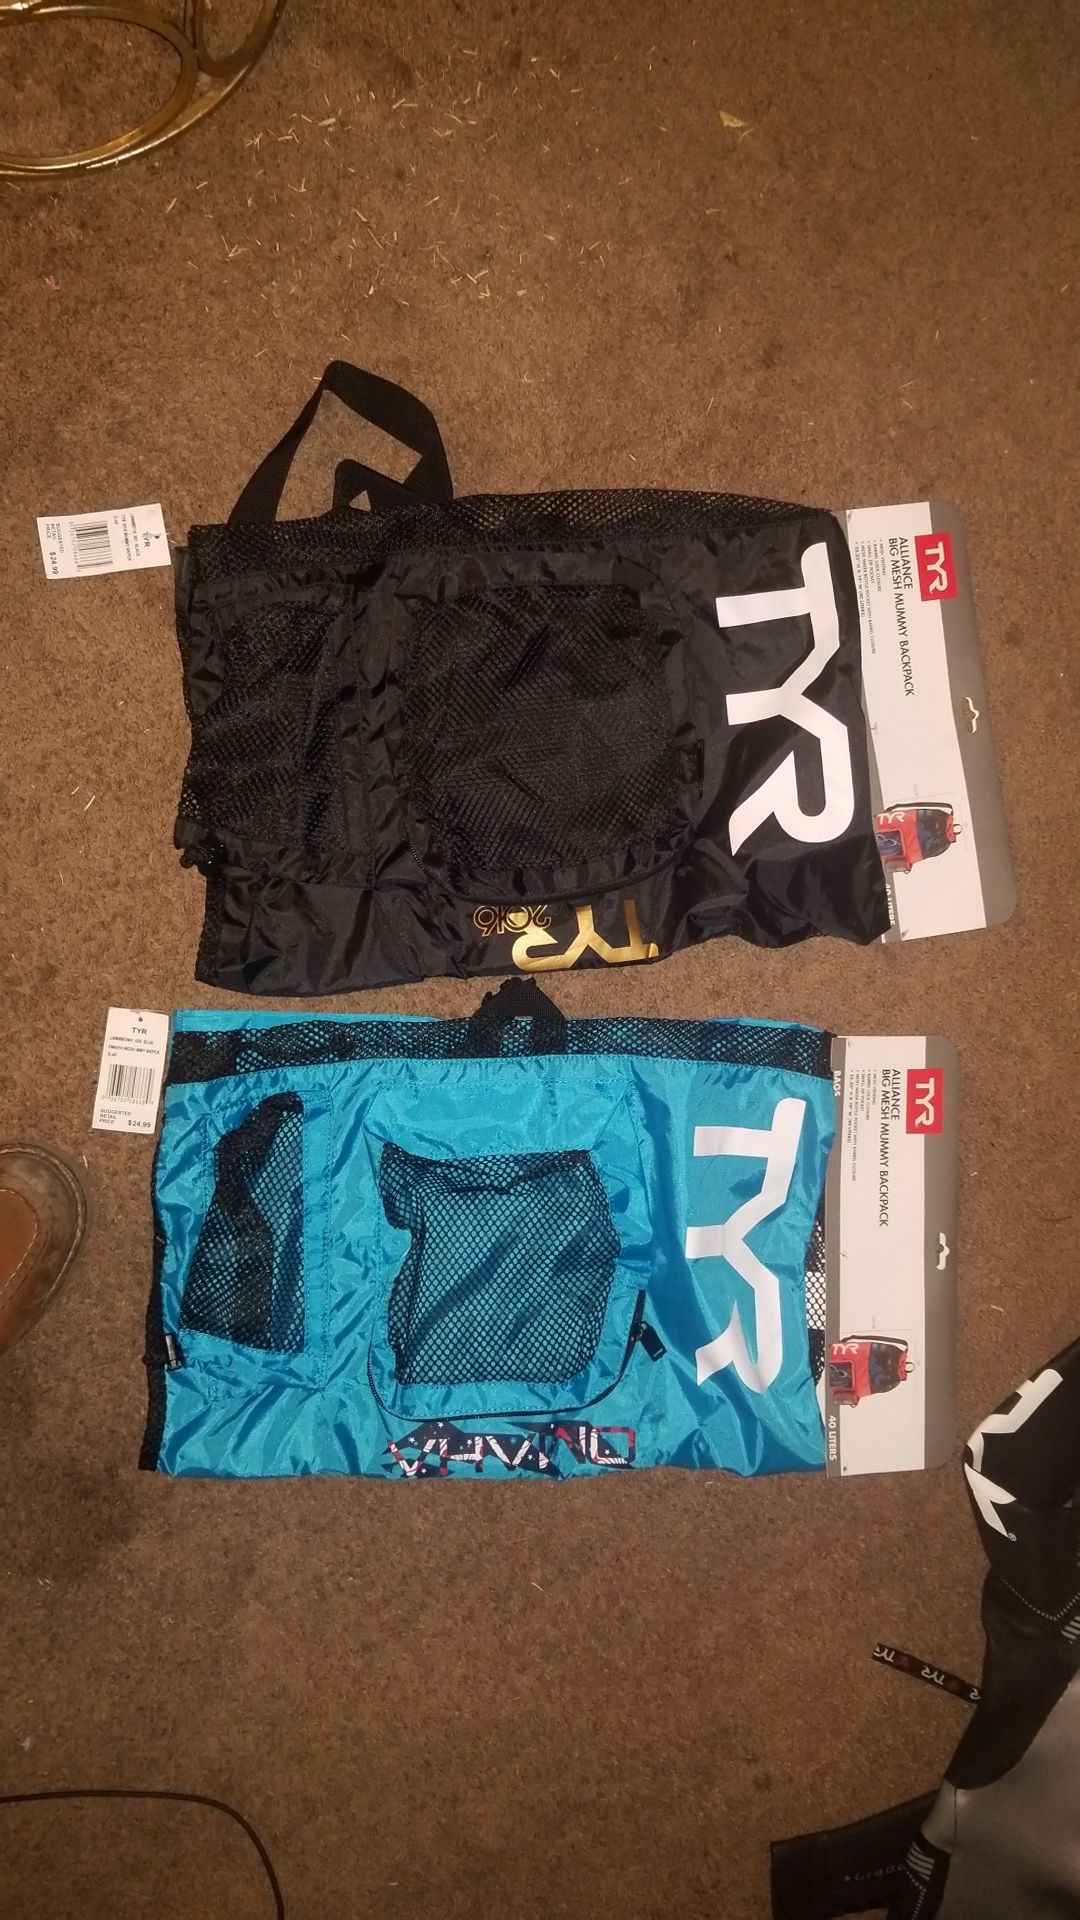 TYR! 2 NEW TYR MESH BACKPACKS. TAGS STILL ON THEM. ONE BLACK ONE BLUE ASKING $15 EACH OR BEST OFFER!